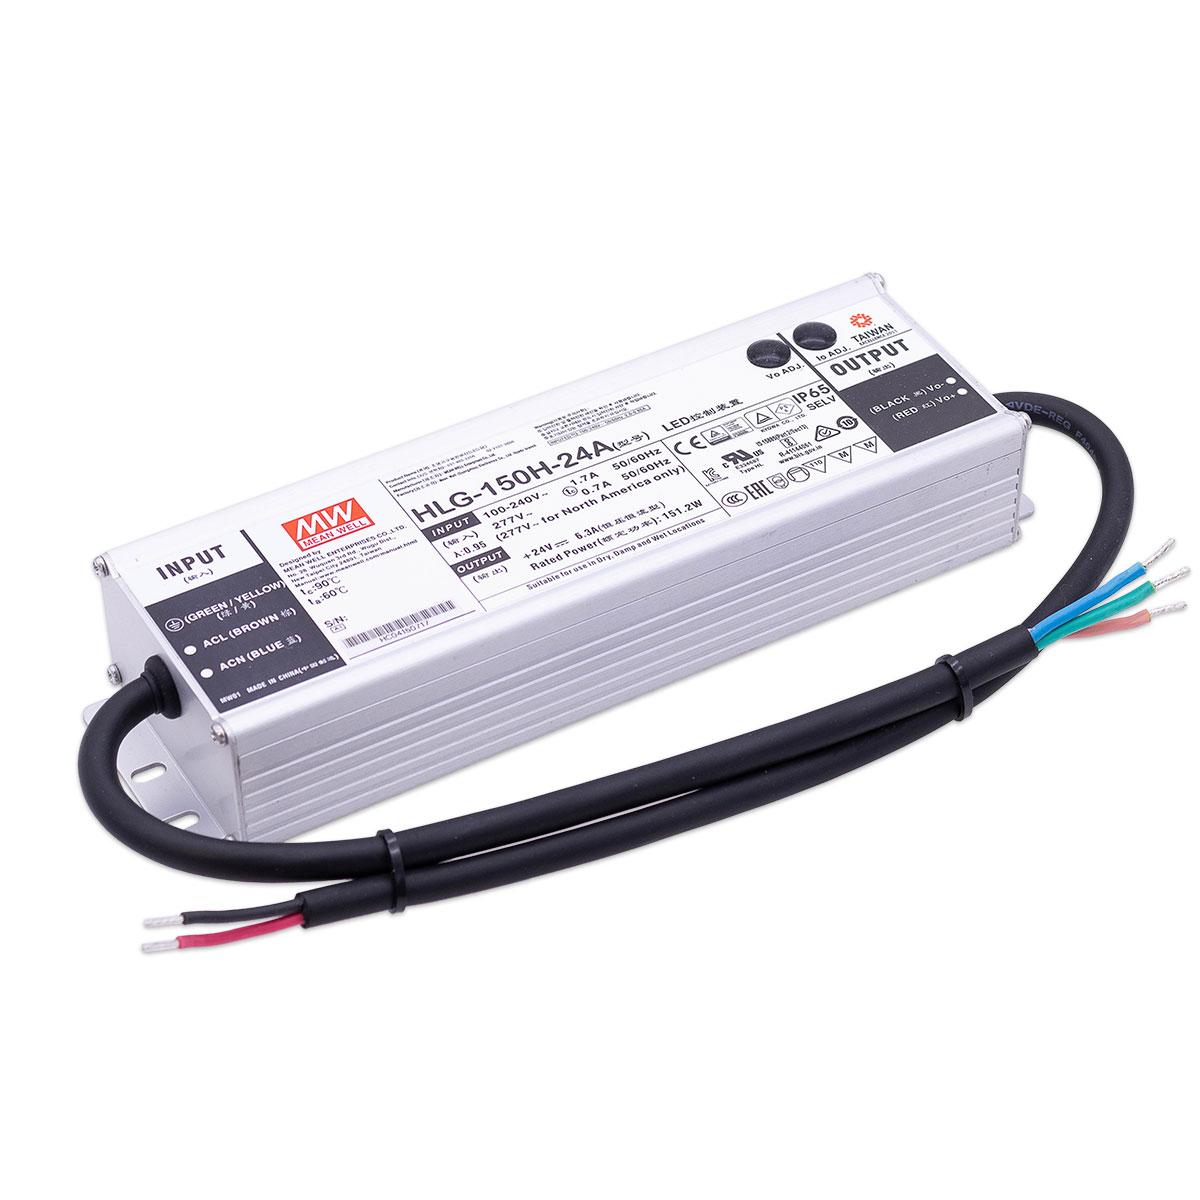 MeanWell HLG-150H-24A 150W 24V 6,3A LED Netzteil IP65 